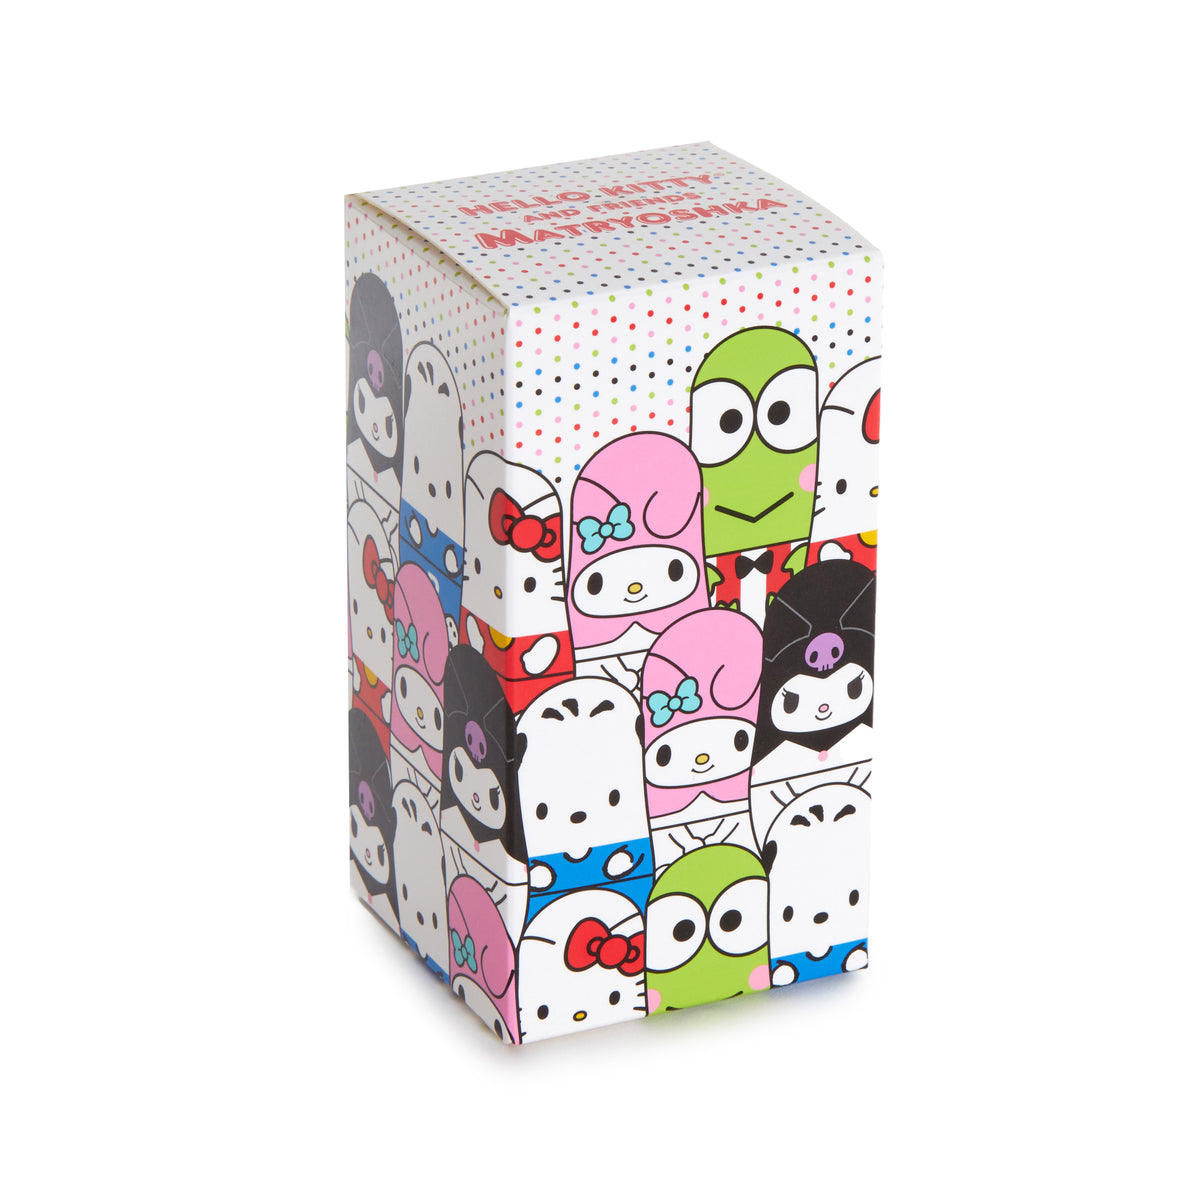 Hello Kitty and Friends Nesting Dolls Home Goods HUNET GLOBAL CREATIONS INC   